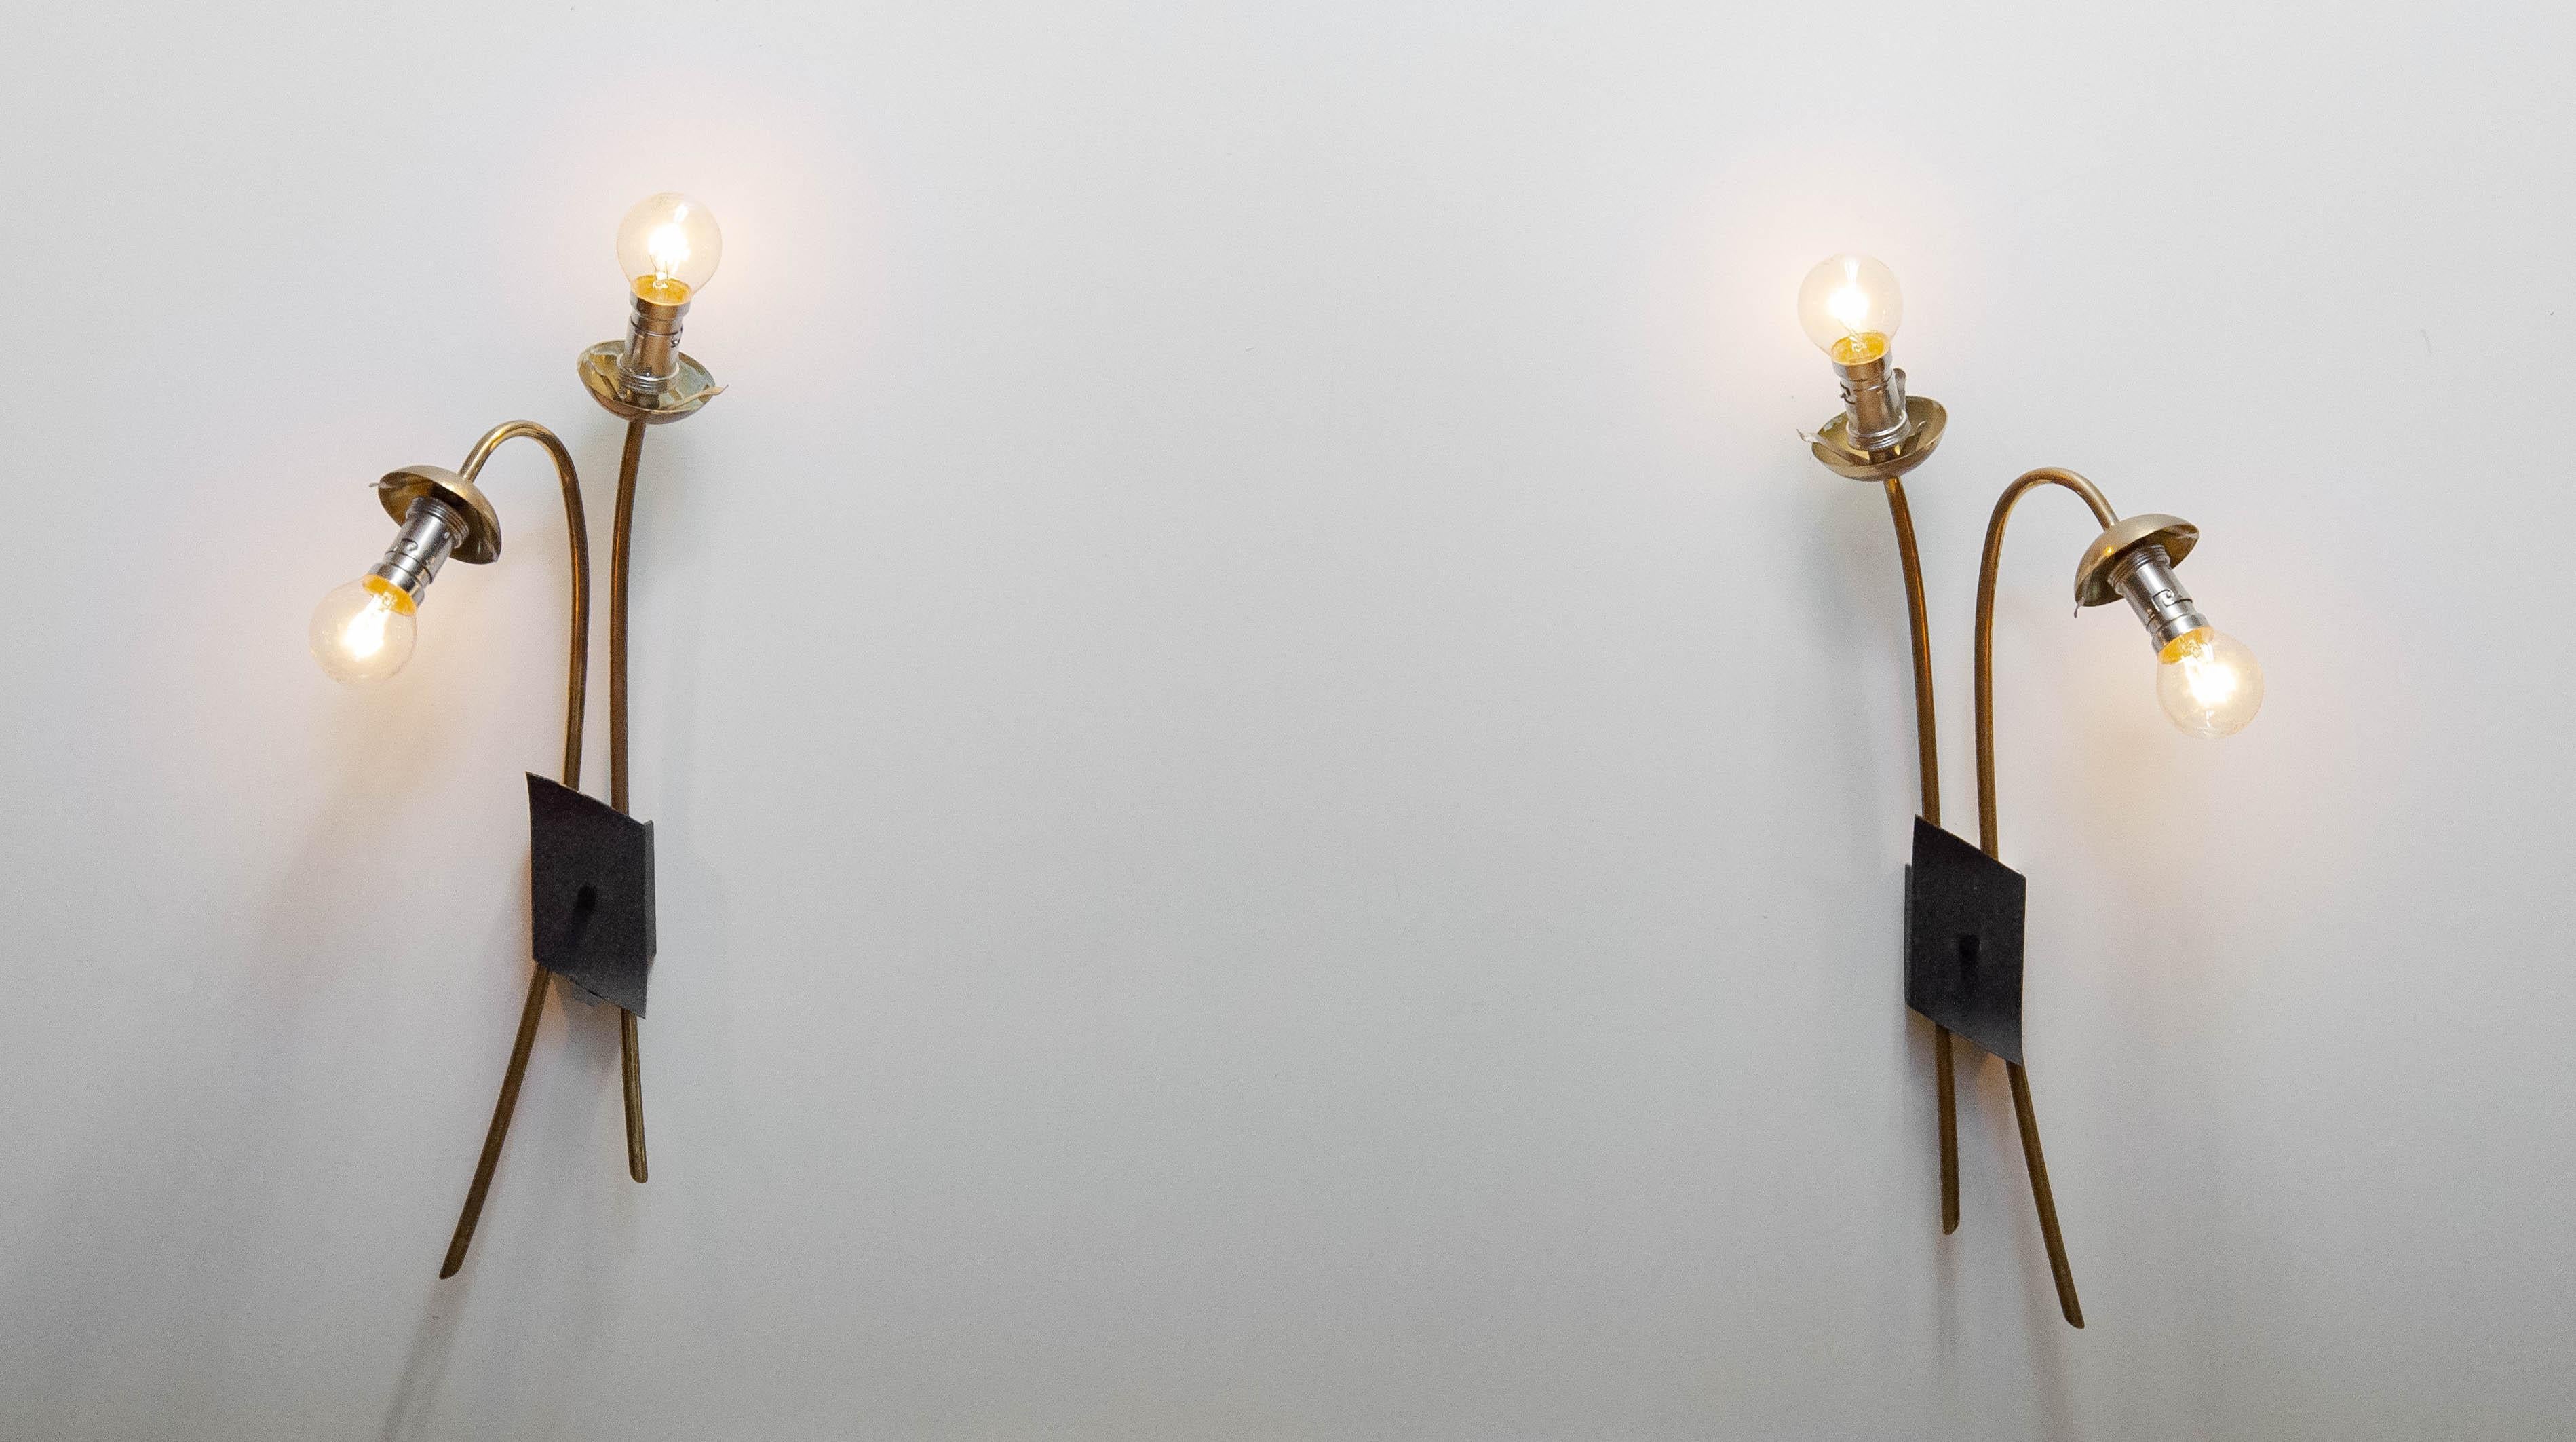 Pair French Brass And Opal Wall Lights / Sconces By Maison Lunel From The 1950s For Sale 3